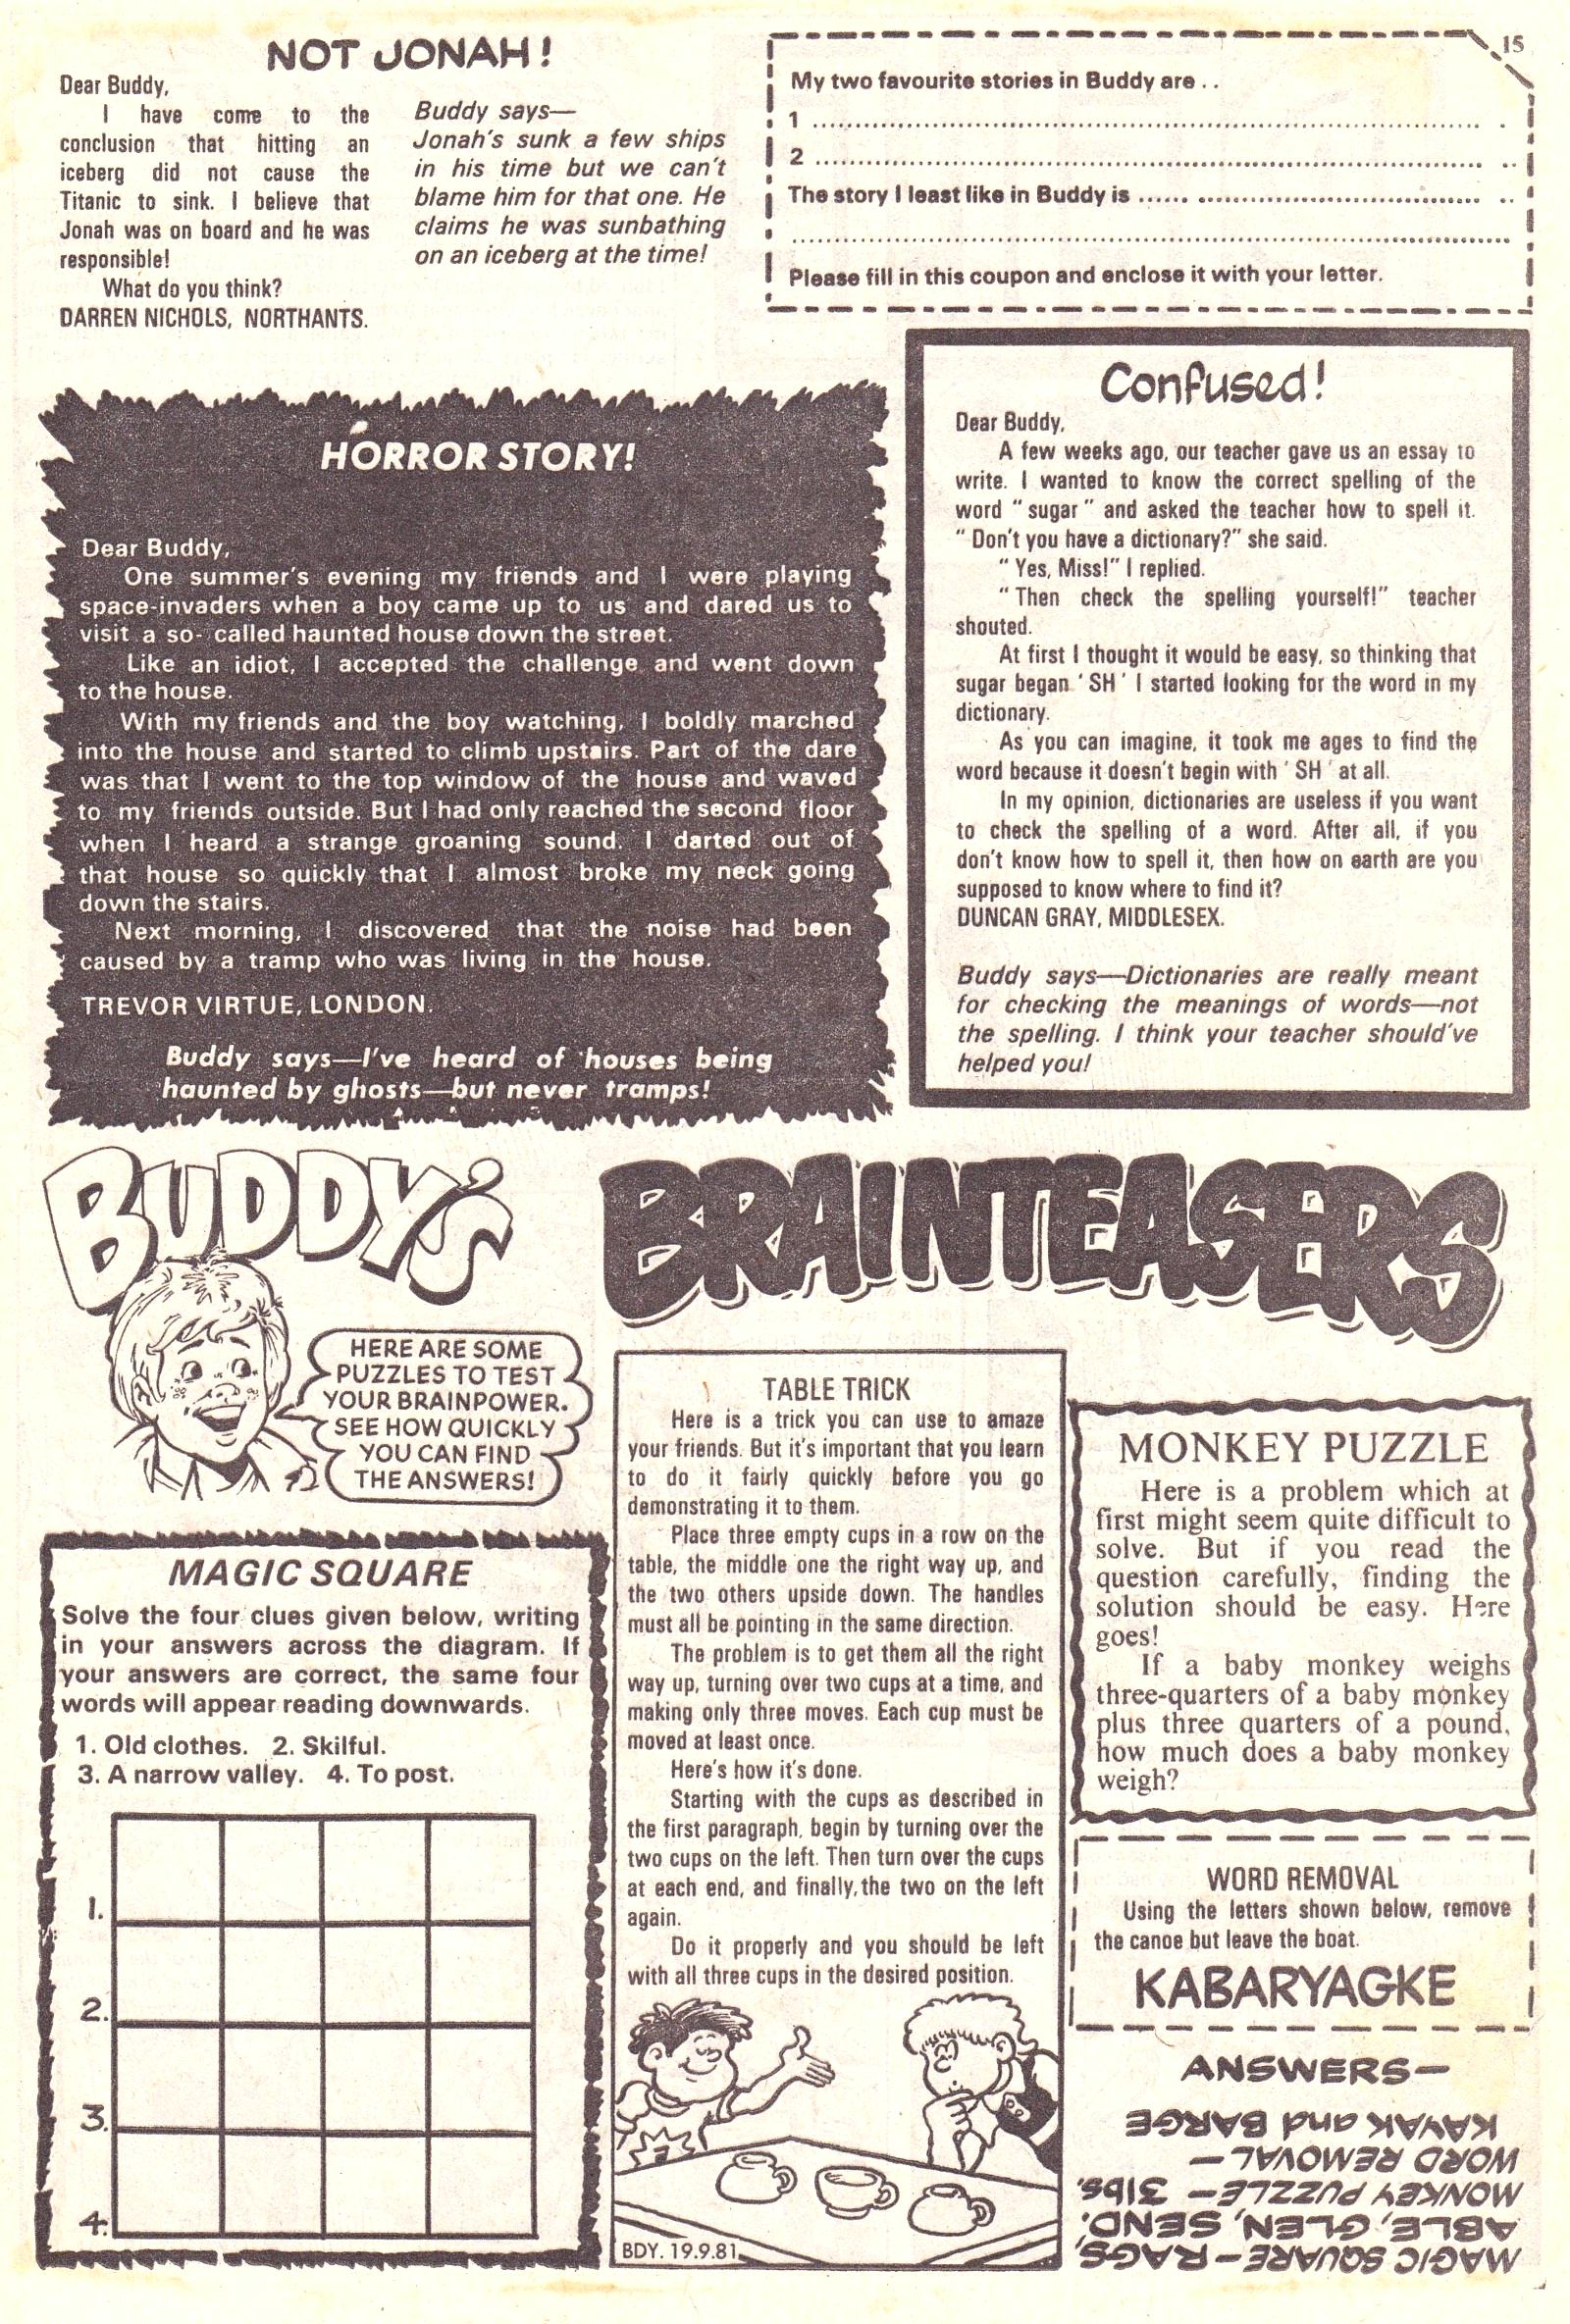 Read online Buddy comic -  Issue #32 - 15